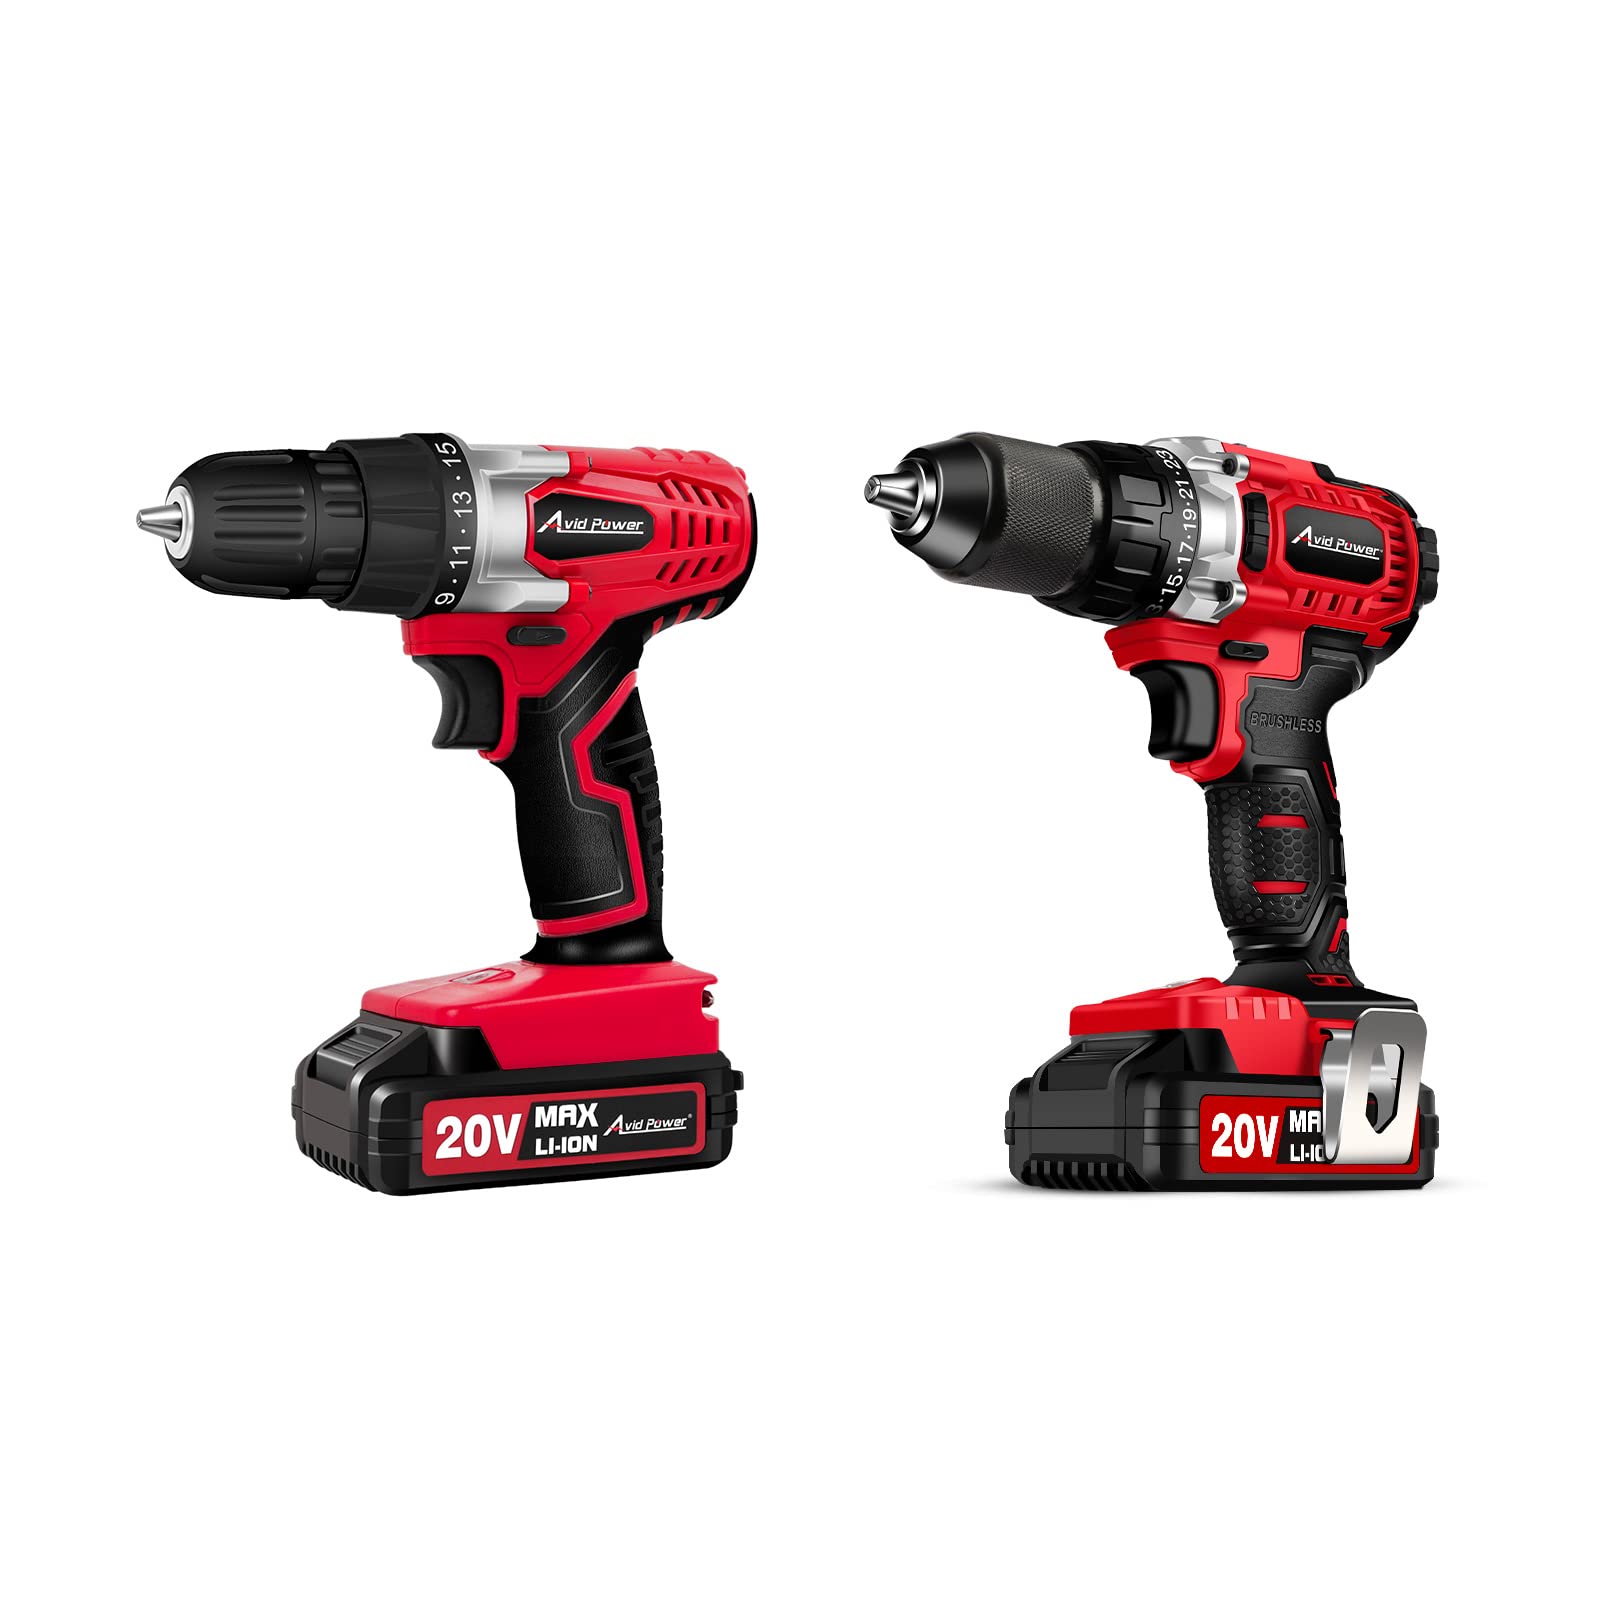 20V MAX Lithium Ion Cordless Drill Bundle with 20V Brushless Drill Driver Kit